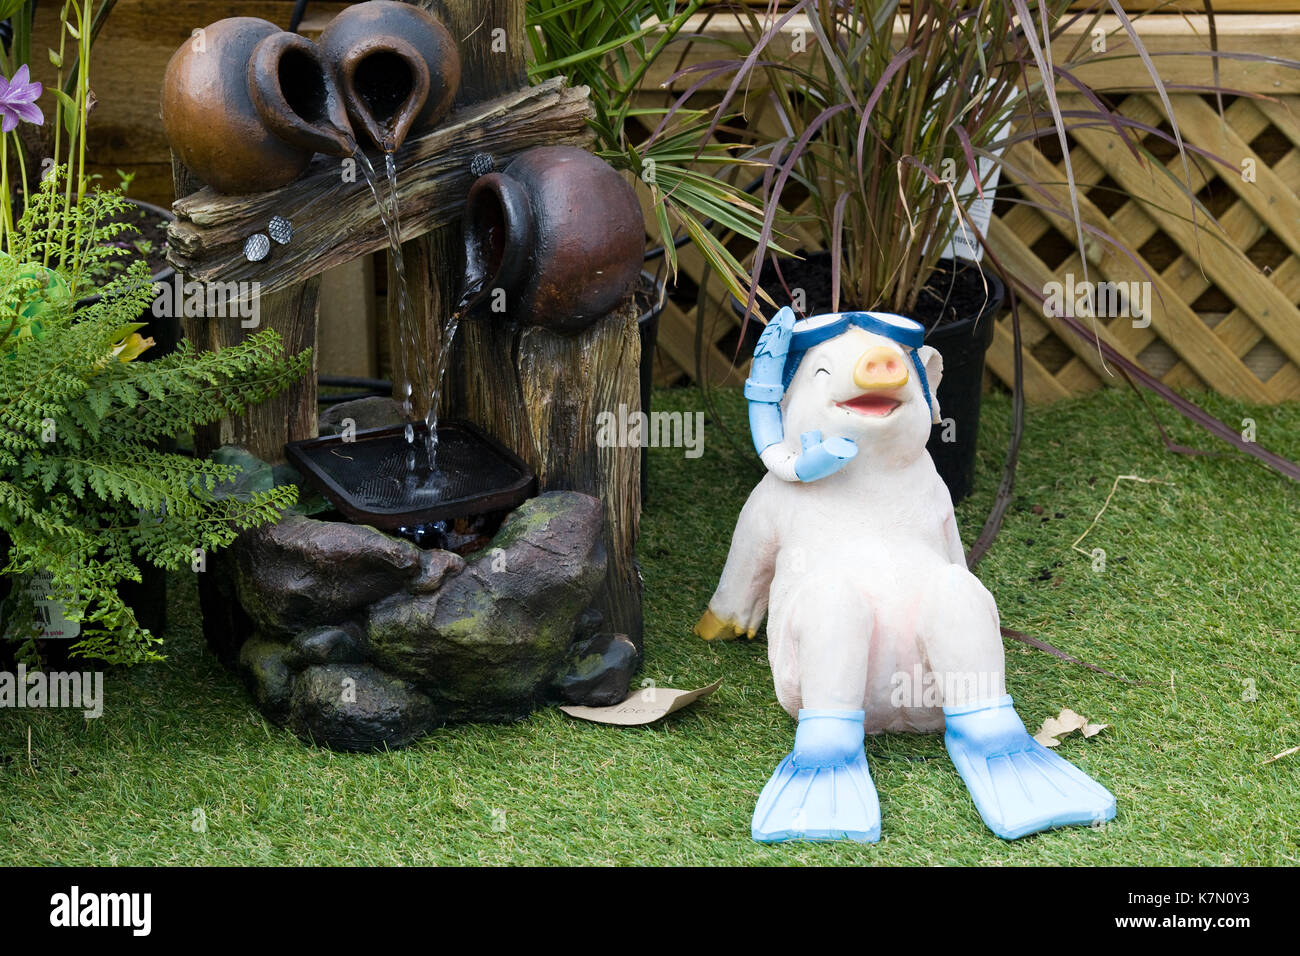 snorkling pig and water feature in the garden Stock Photo